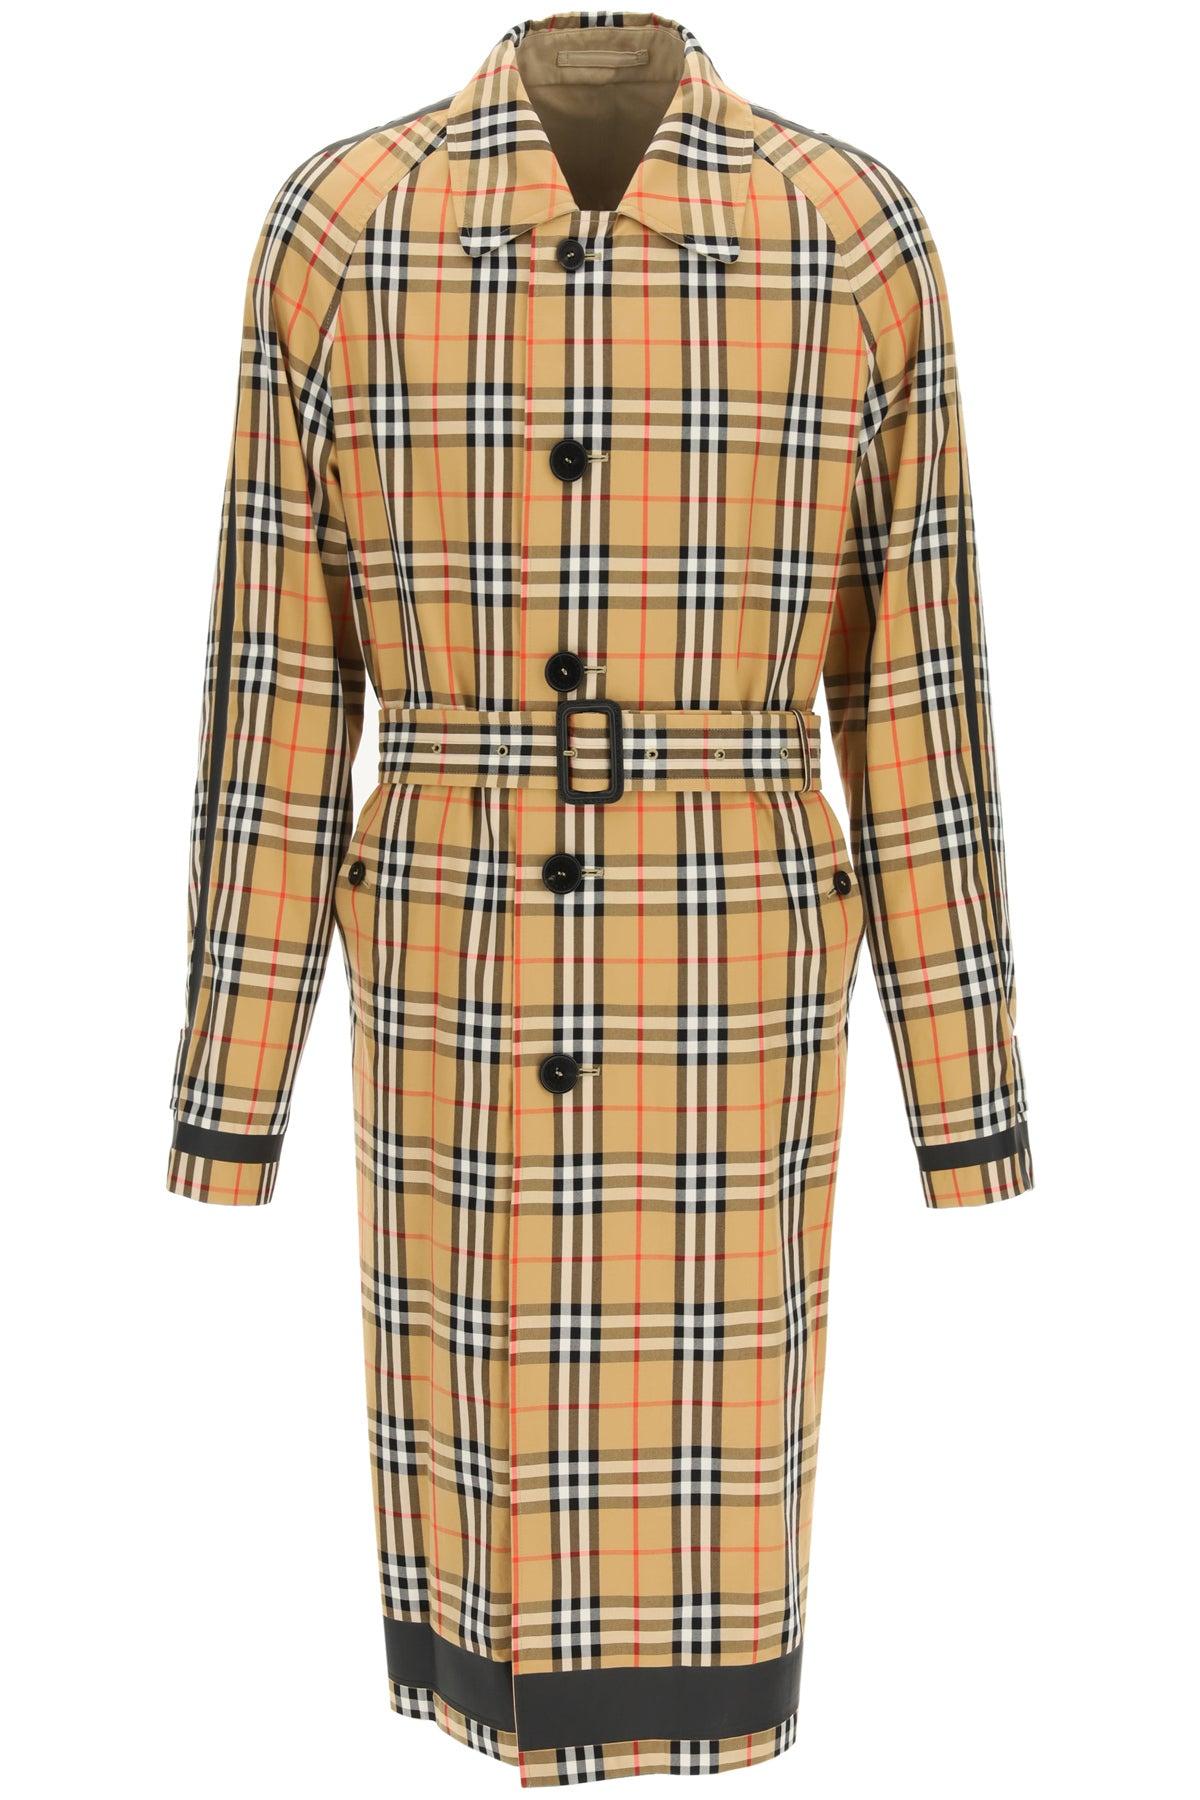 Burberry Reversible Trench Coat With Tartan Motif in Natural for Men | Lyst